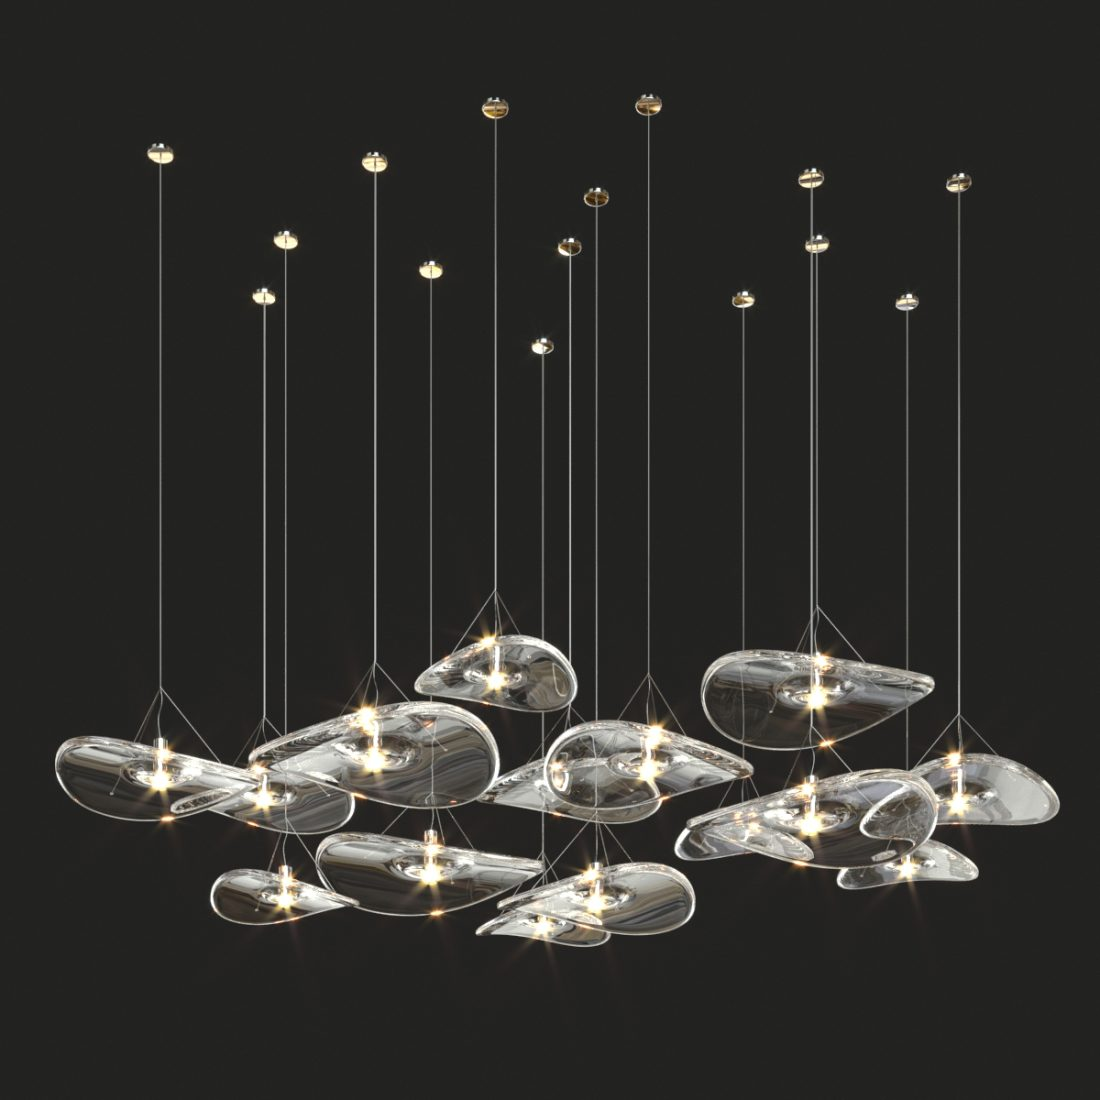 Chandeliers Different Models Stunning Variety of Chandeliers for Every Style and Space